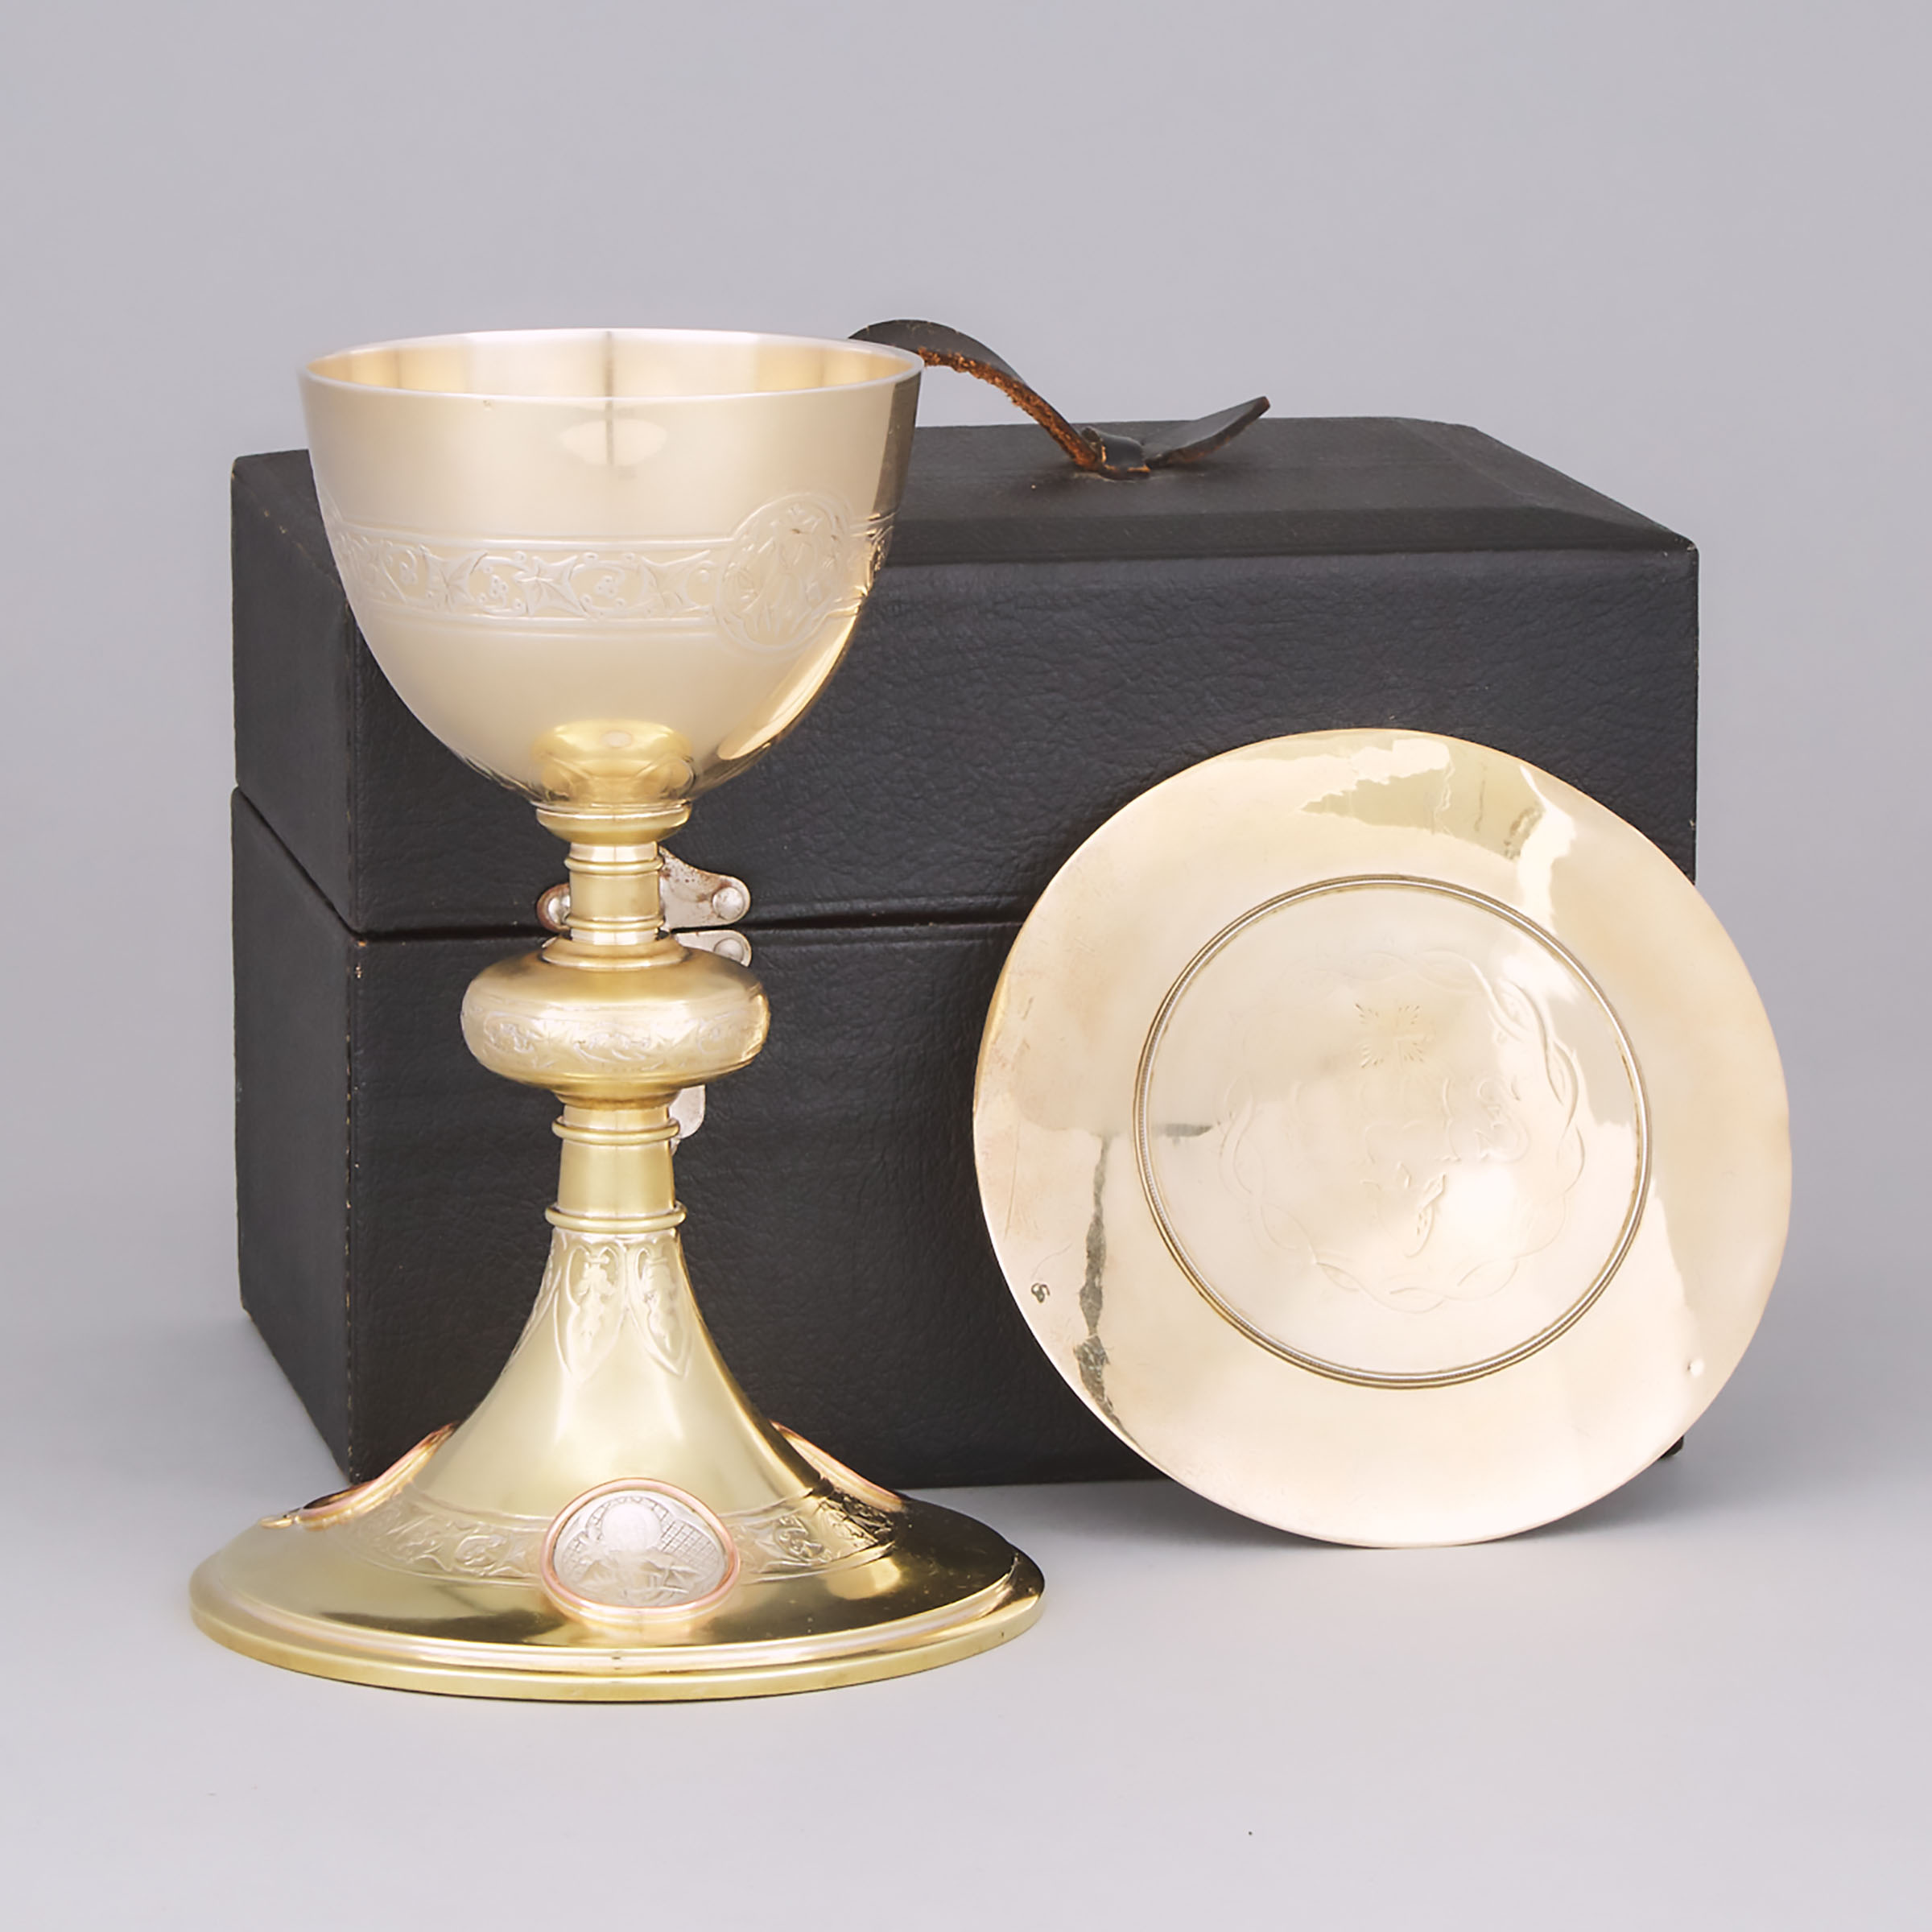 French Silver-Gilt and Silver Plated Chalice and Paten, early 20th century